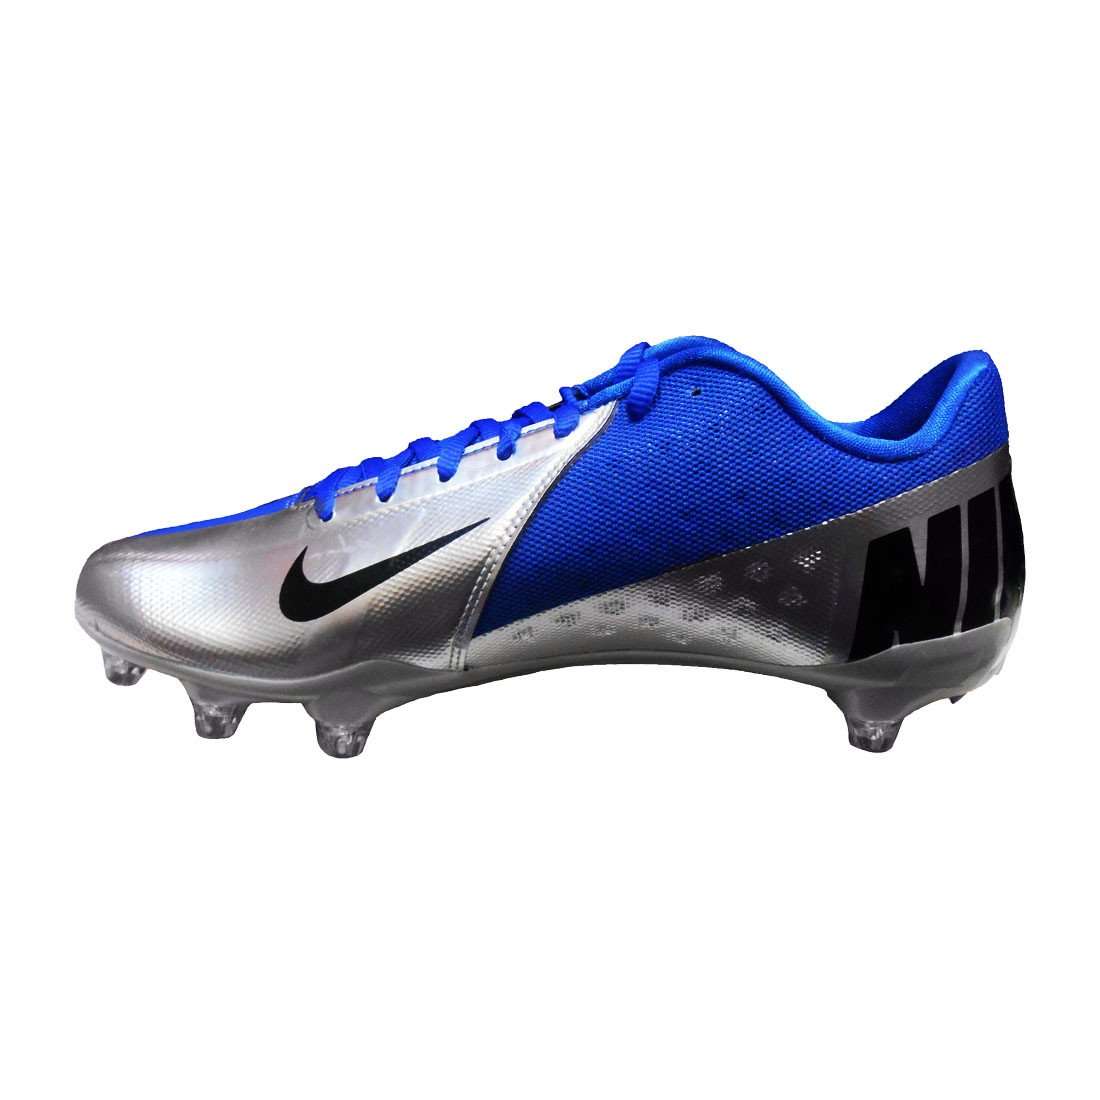 removable football cleats